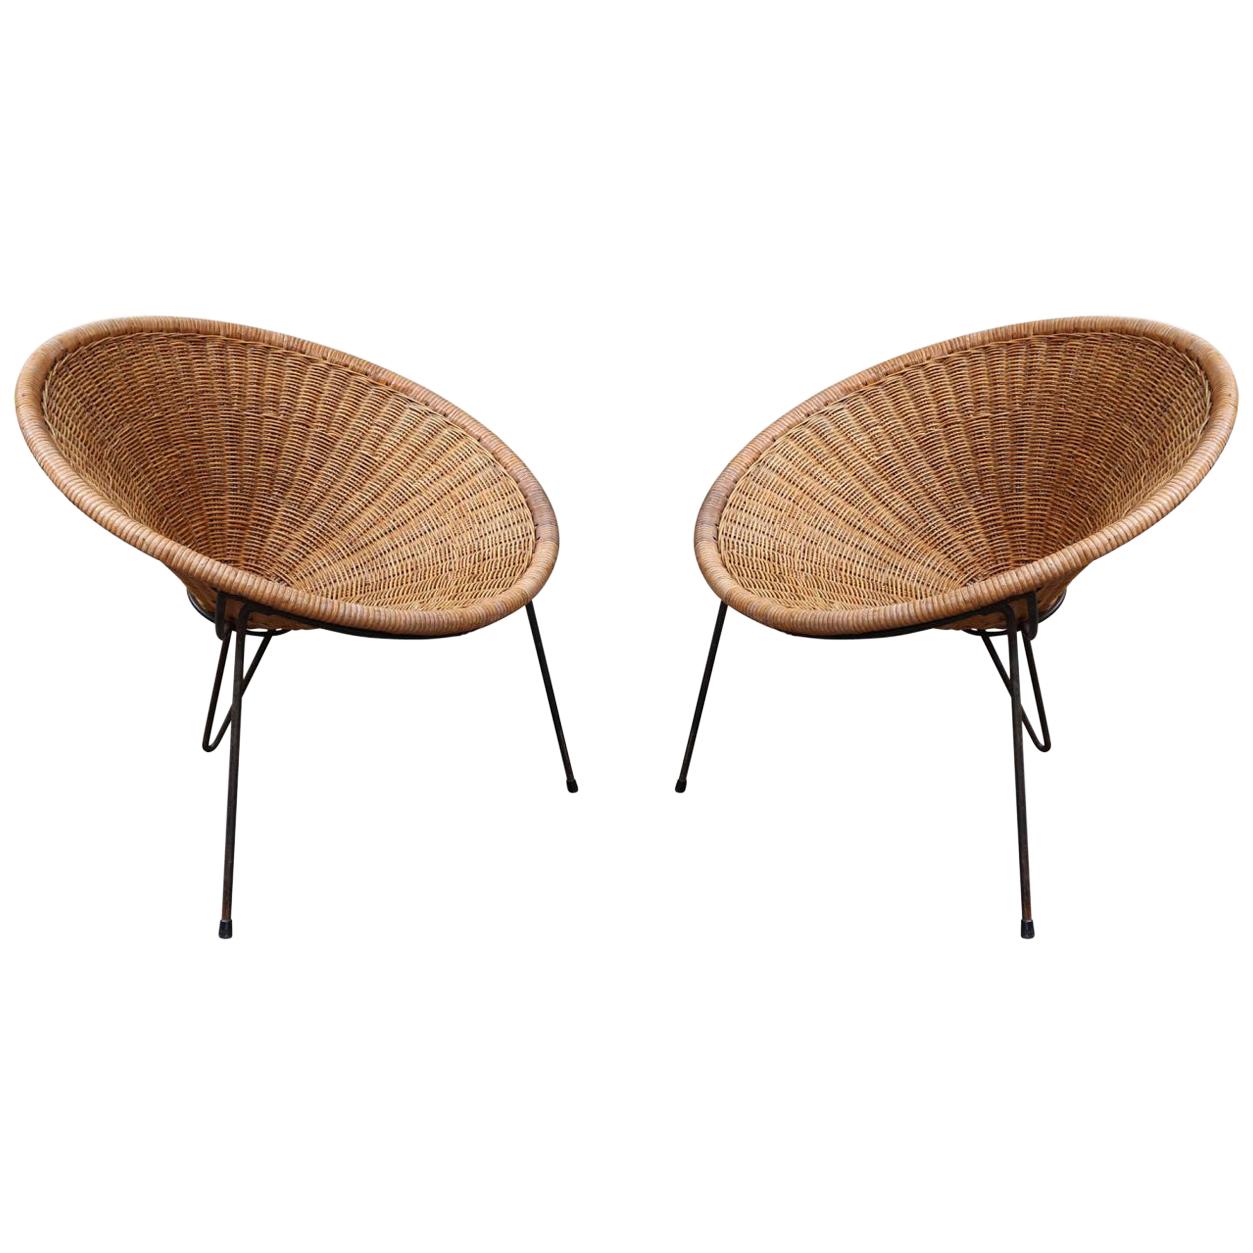 Tito Agnoli Pair of Bamboo and Iron Midcentury Italian Armchairs, 1950 For Sale